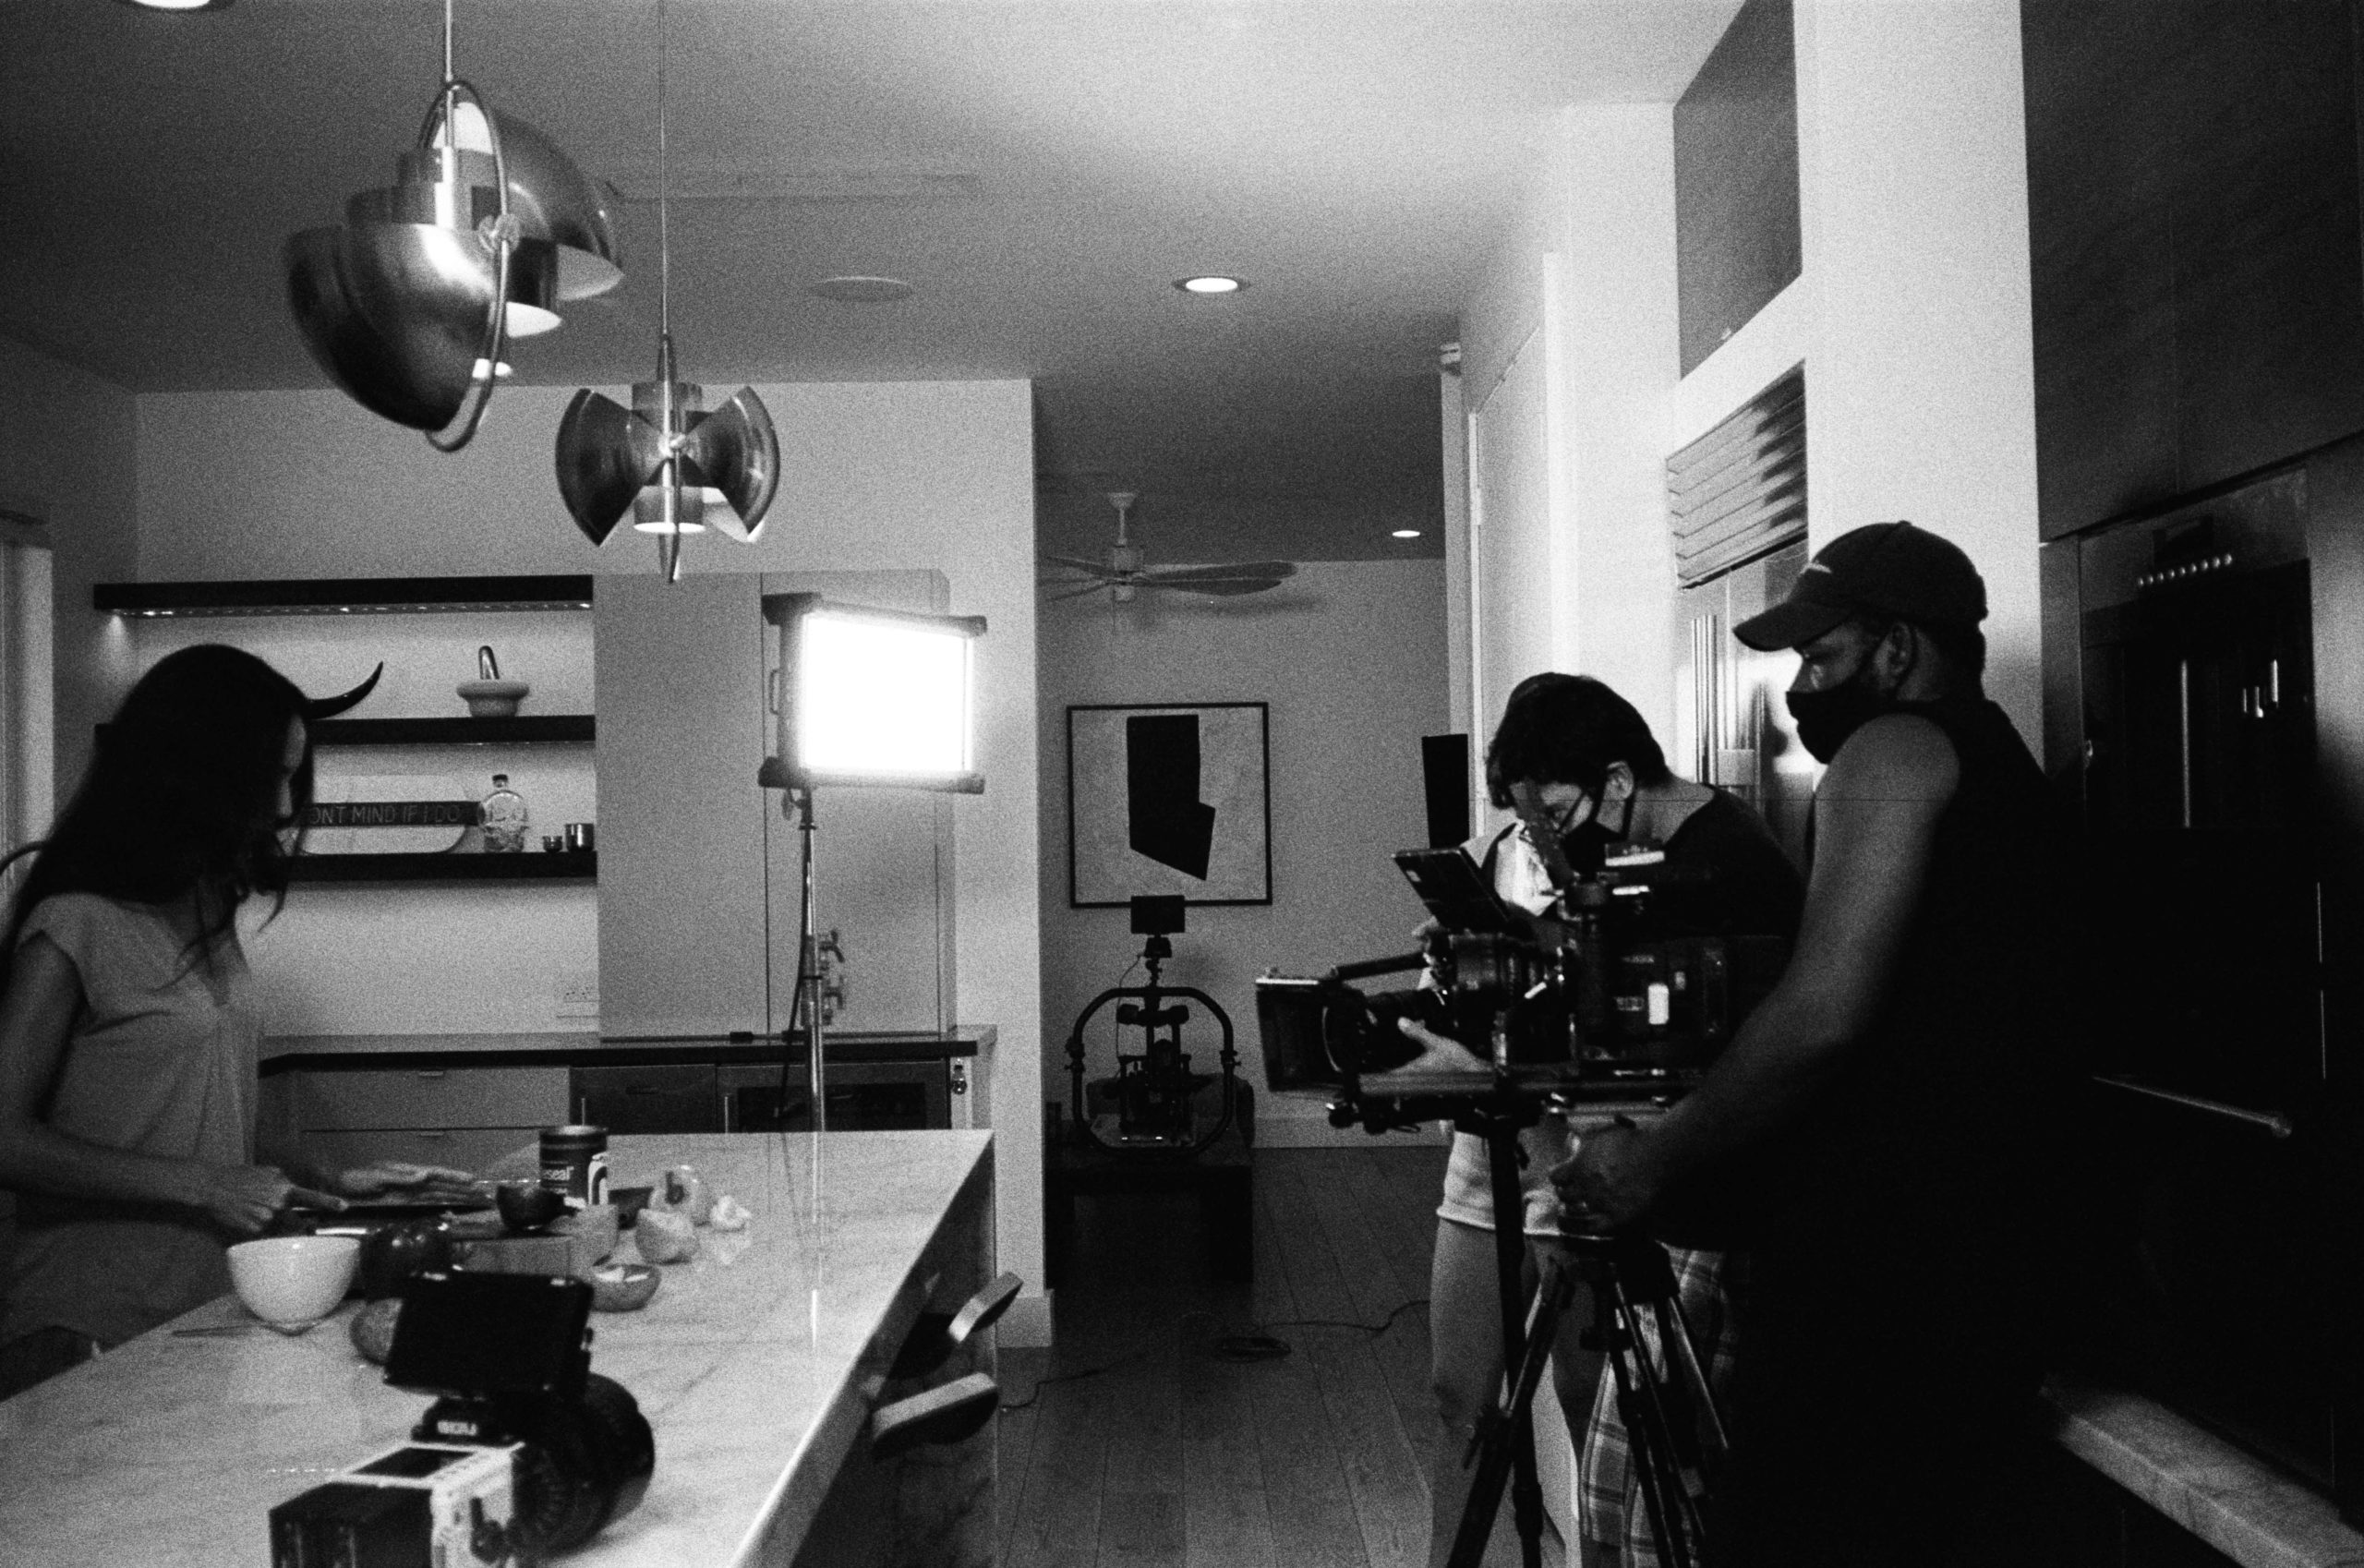 Promotional Video for My Business. Black and white photo of a cooking show in progress with a woman cooking at the counter and two males wearing masks filming the show. There is another video camera on the counter as well.